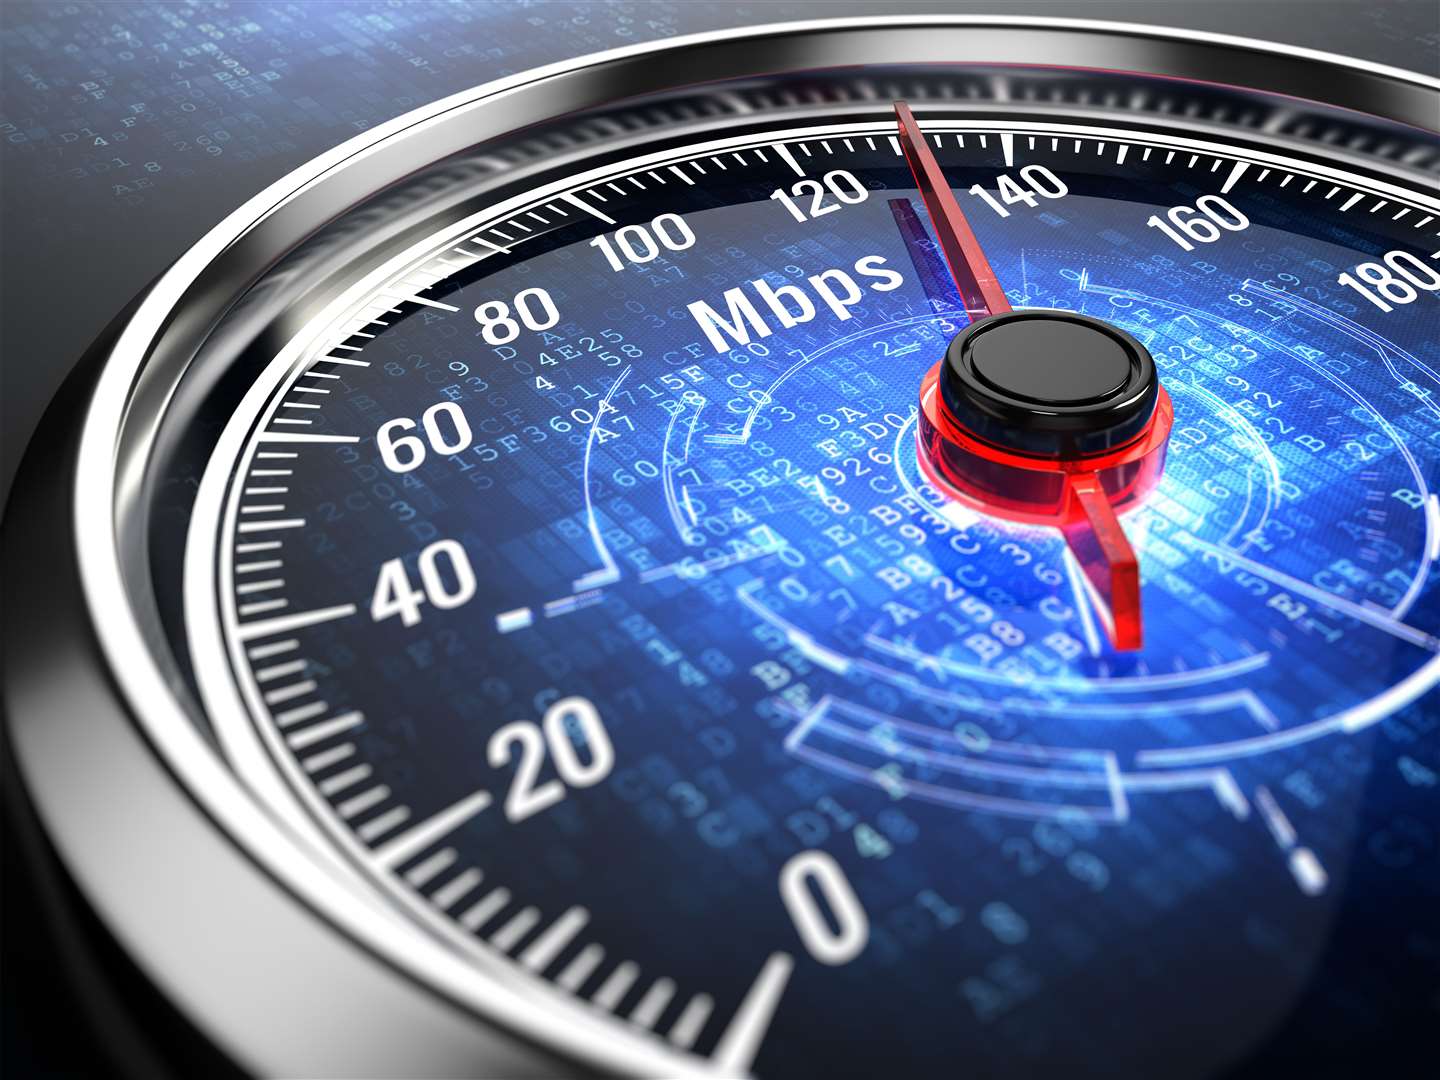 There are concerns over the timescale for superfast broadband roll-out.